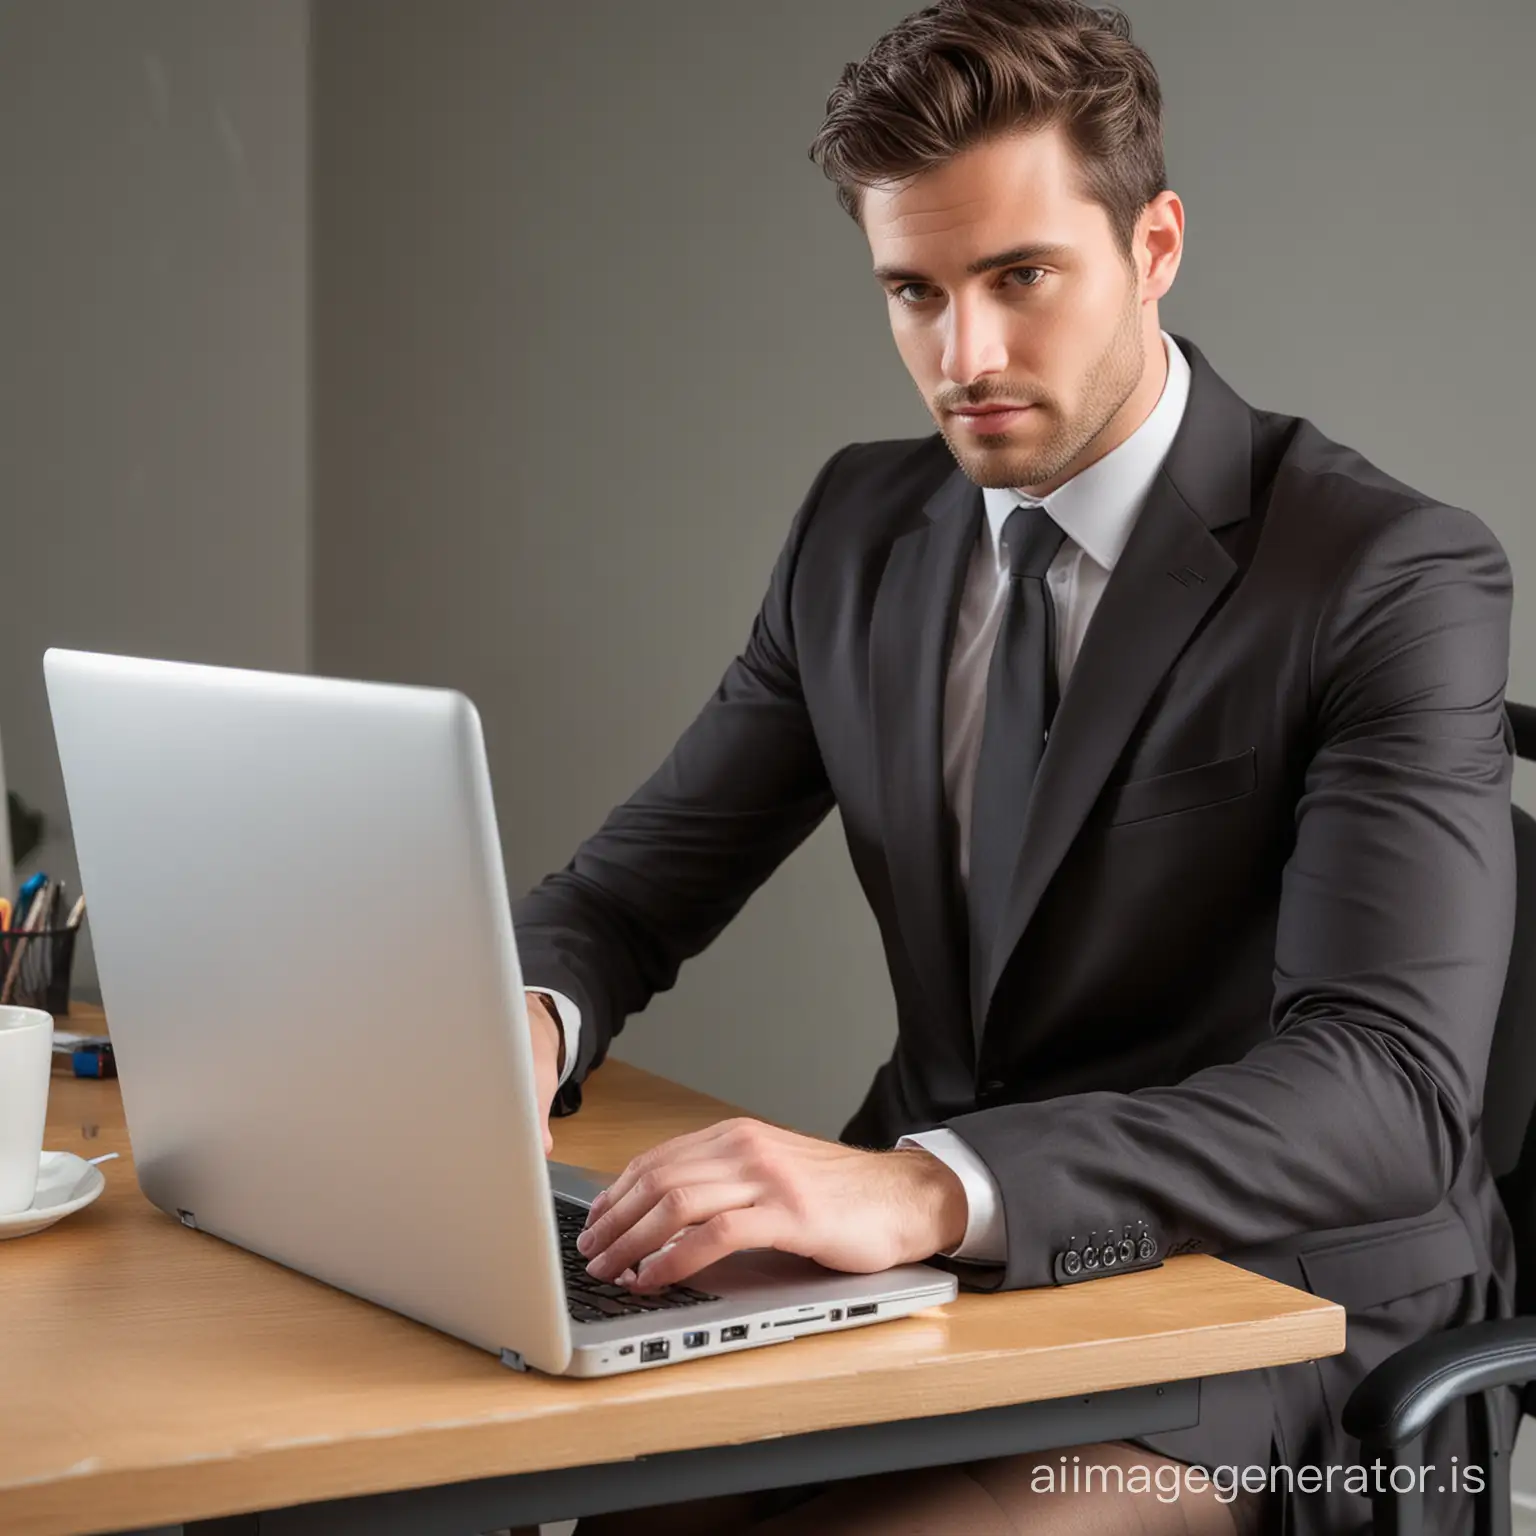 sturdy rugged 28-year old business man wearing sheer tights and working on his laptop at his desk